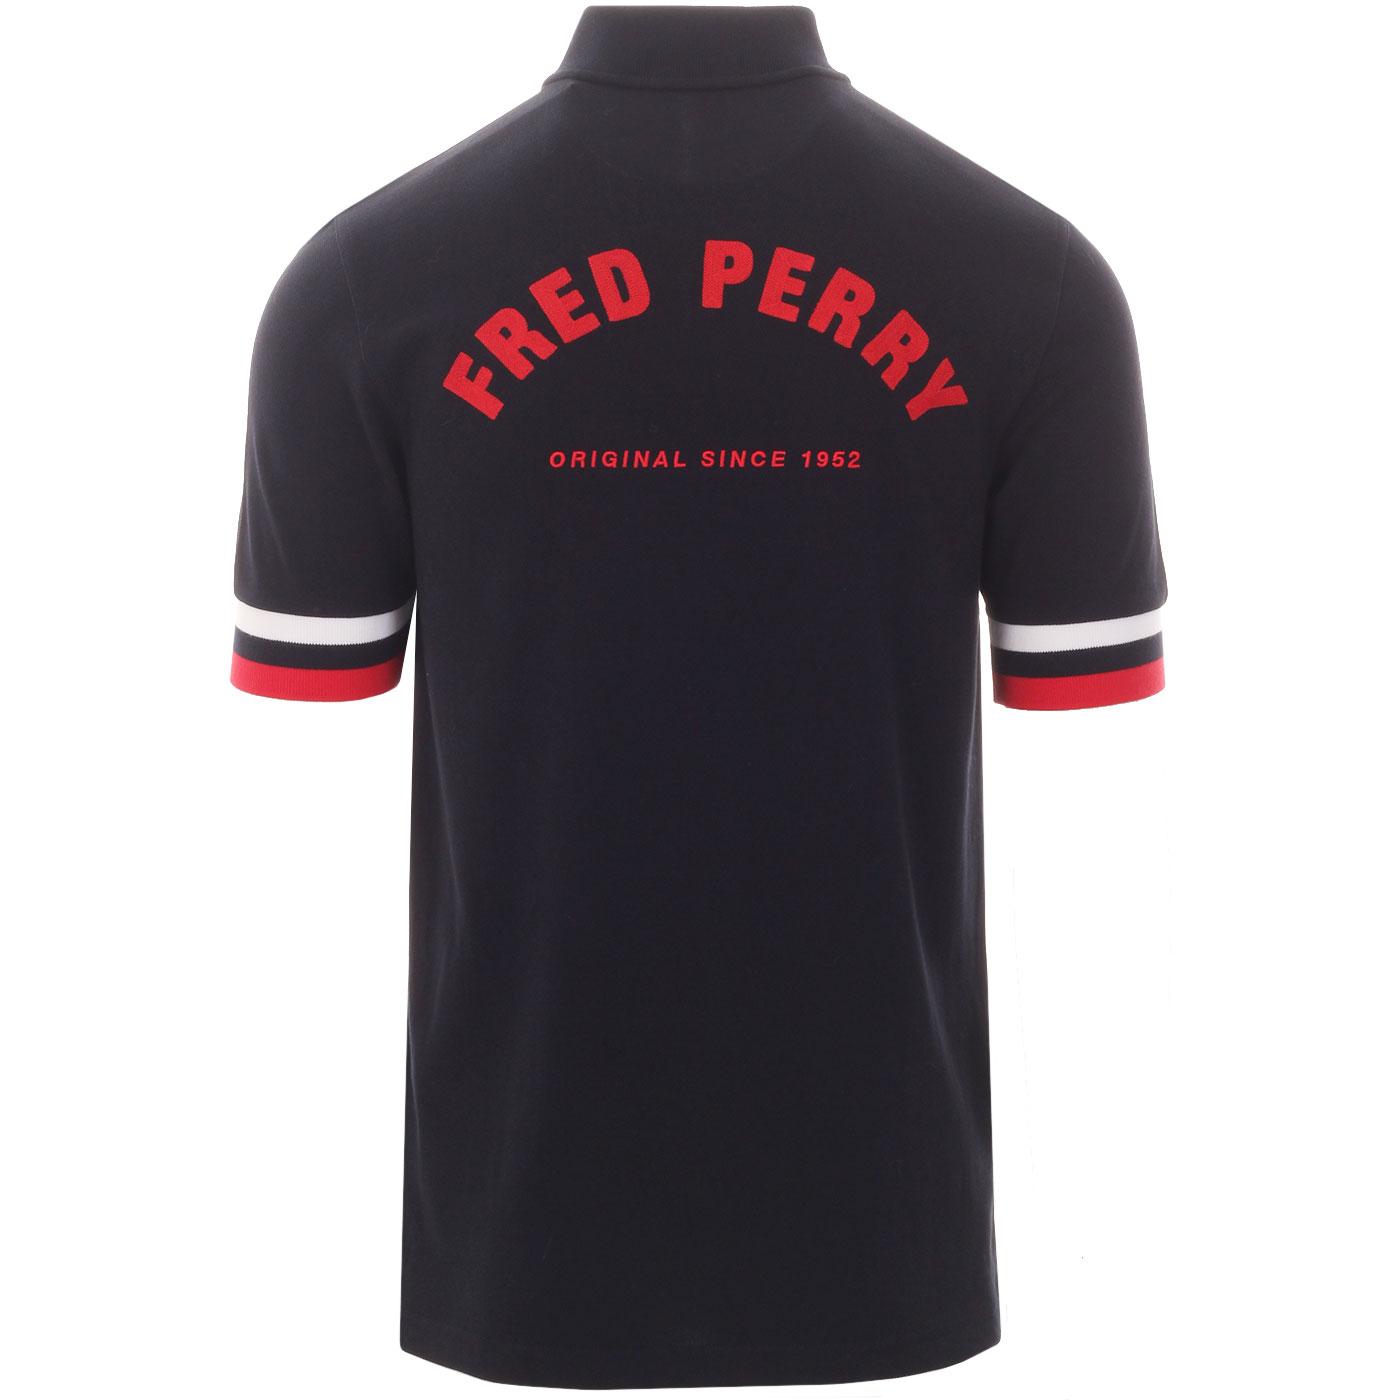 FRED PERRY Men's Retro Mod Pique Cycling Top in Navy